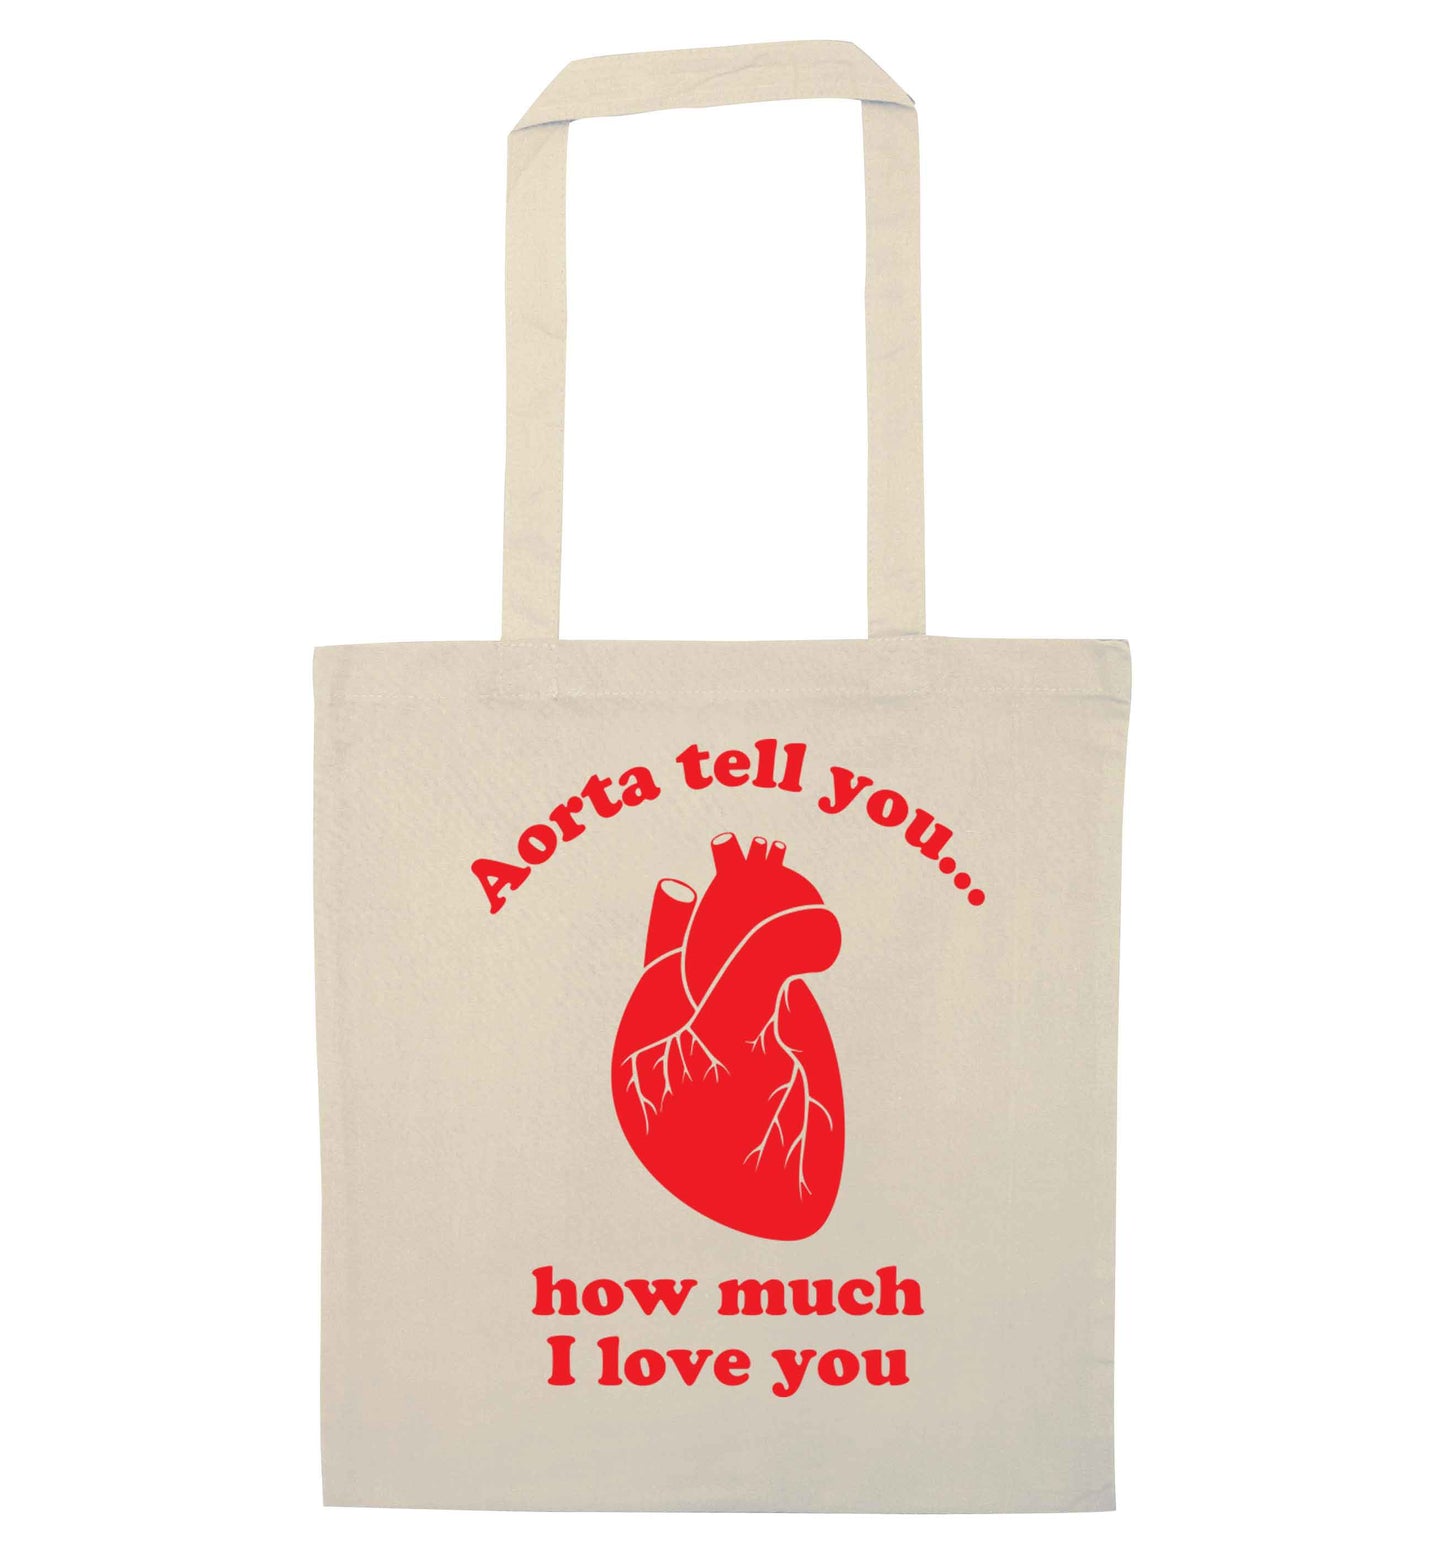 Aorta tell you how much I love you natural tote bag